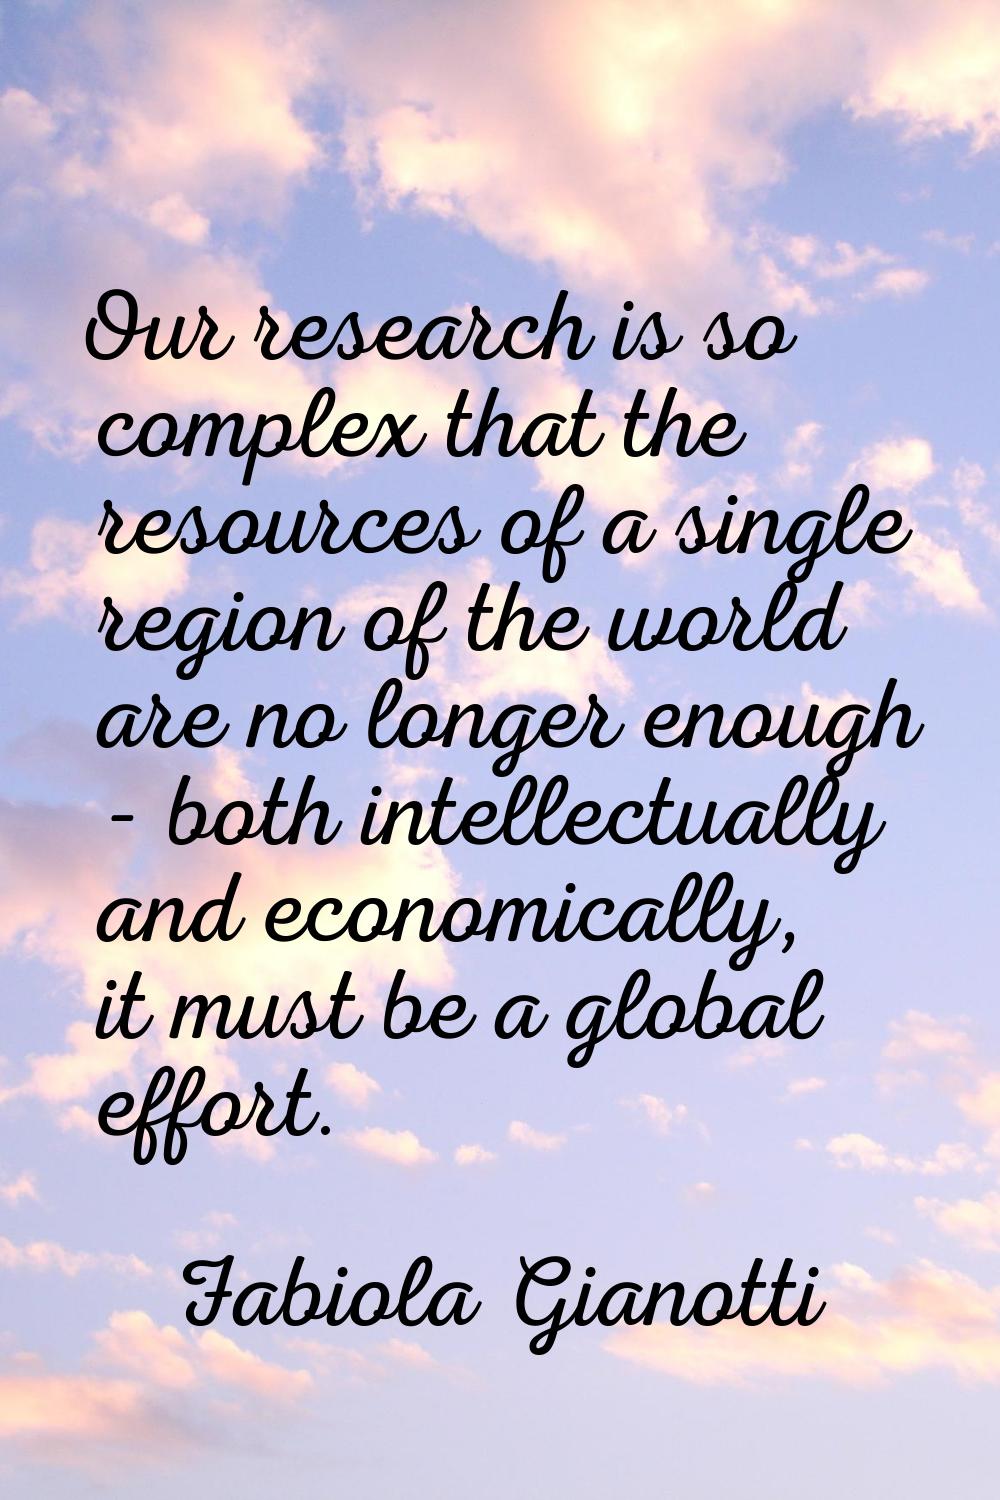 Our research is so complex that the resources of a single region of the world are no longer enough 